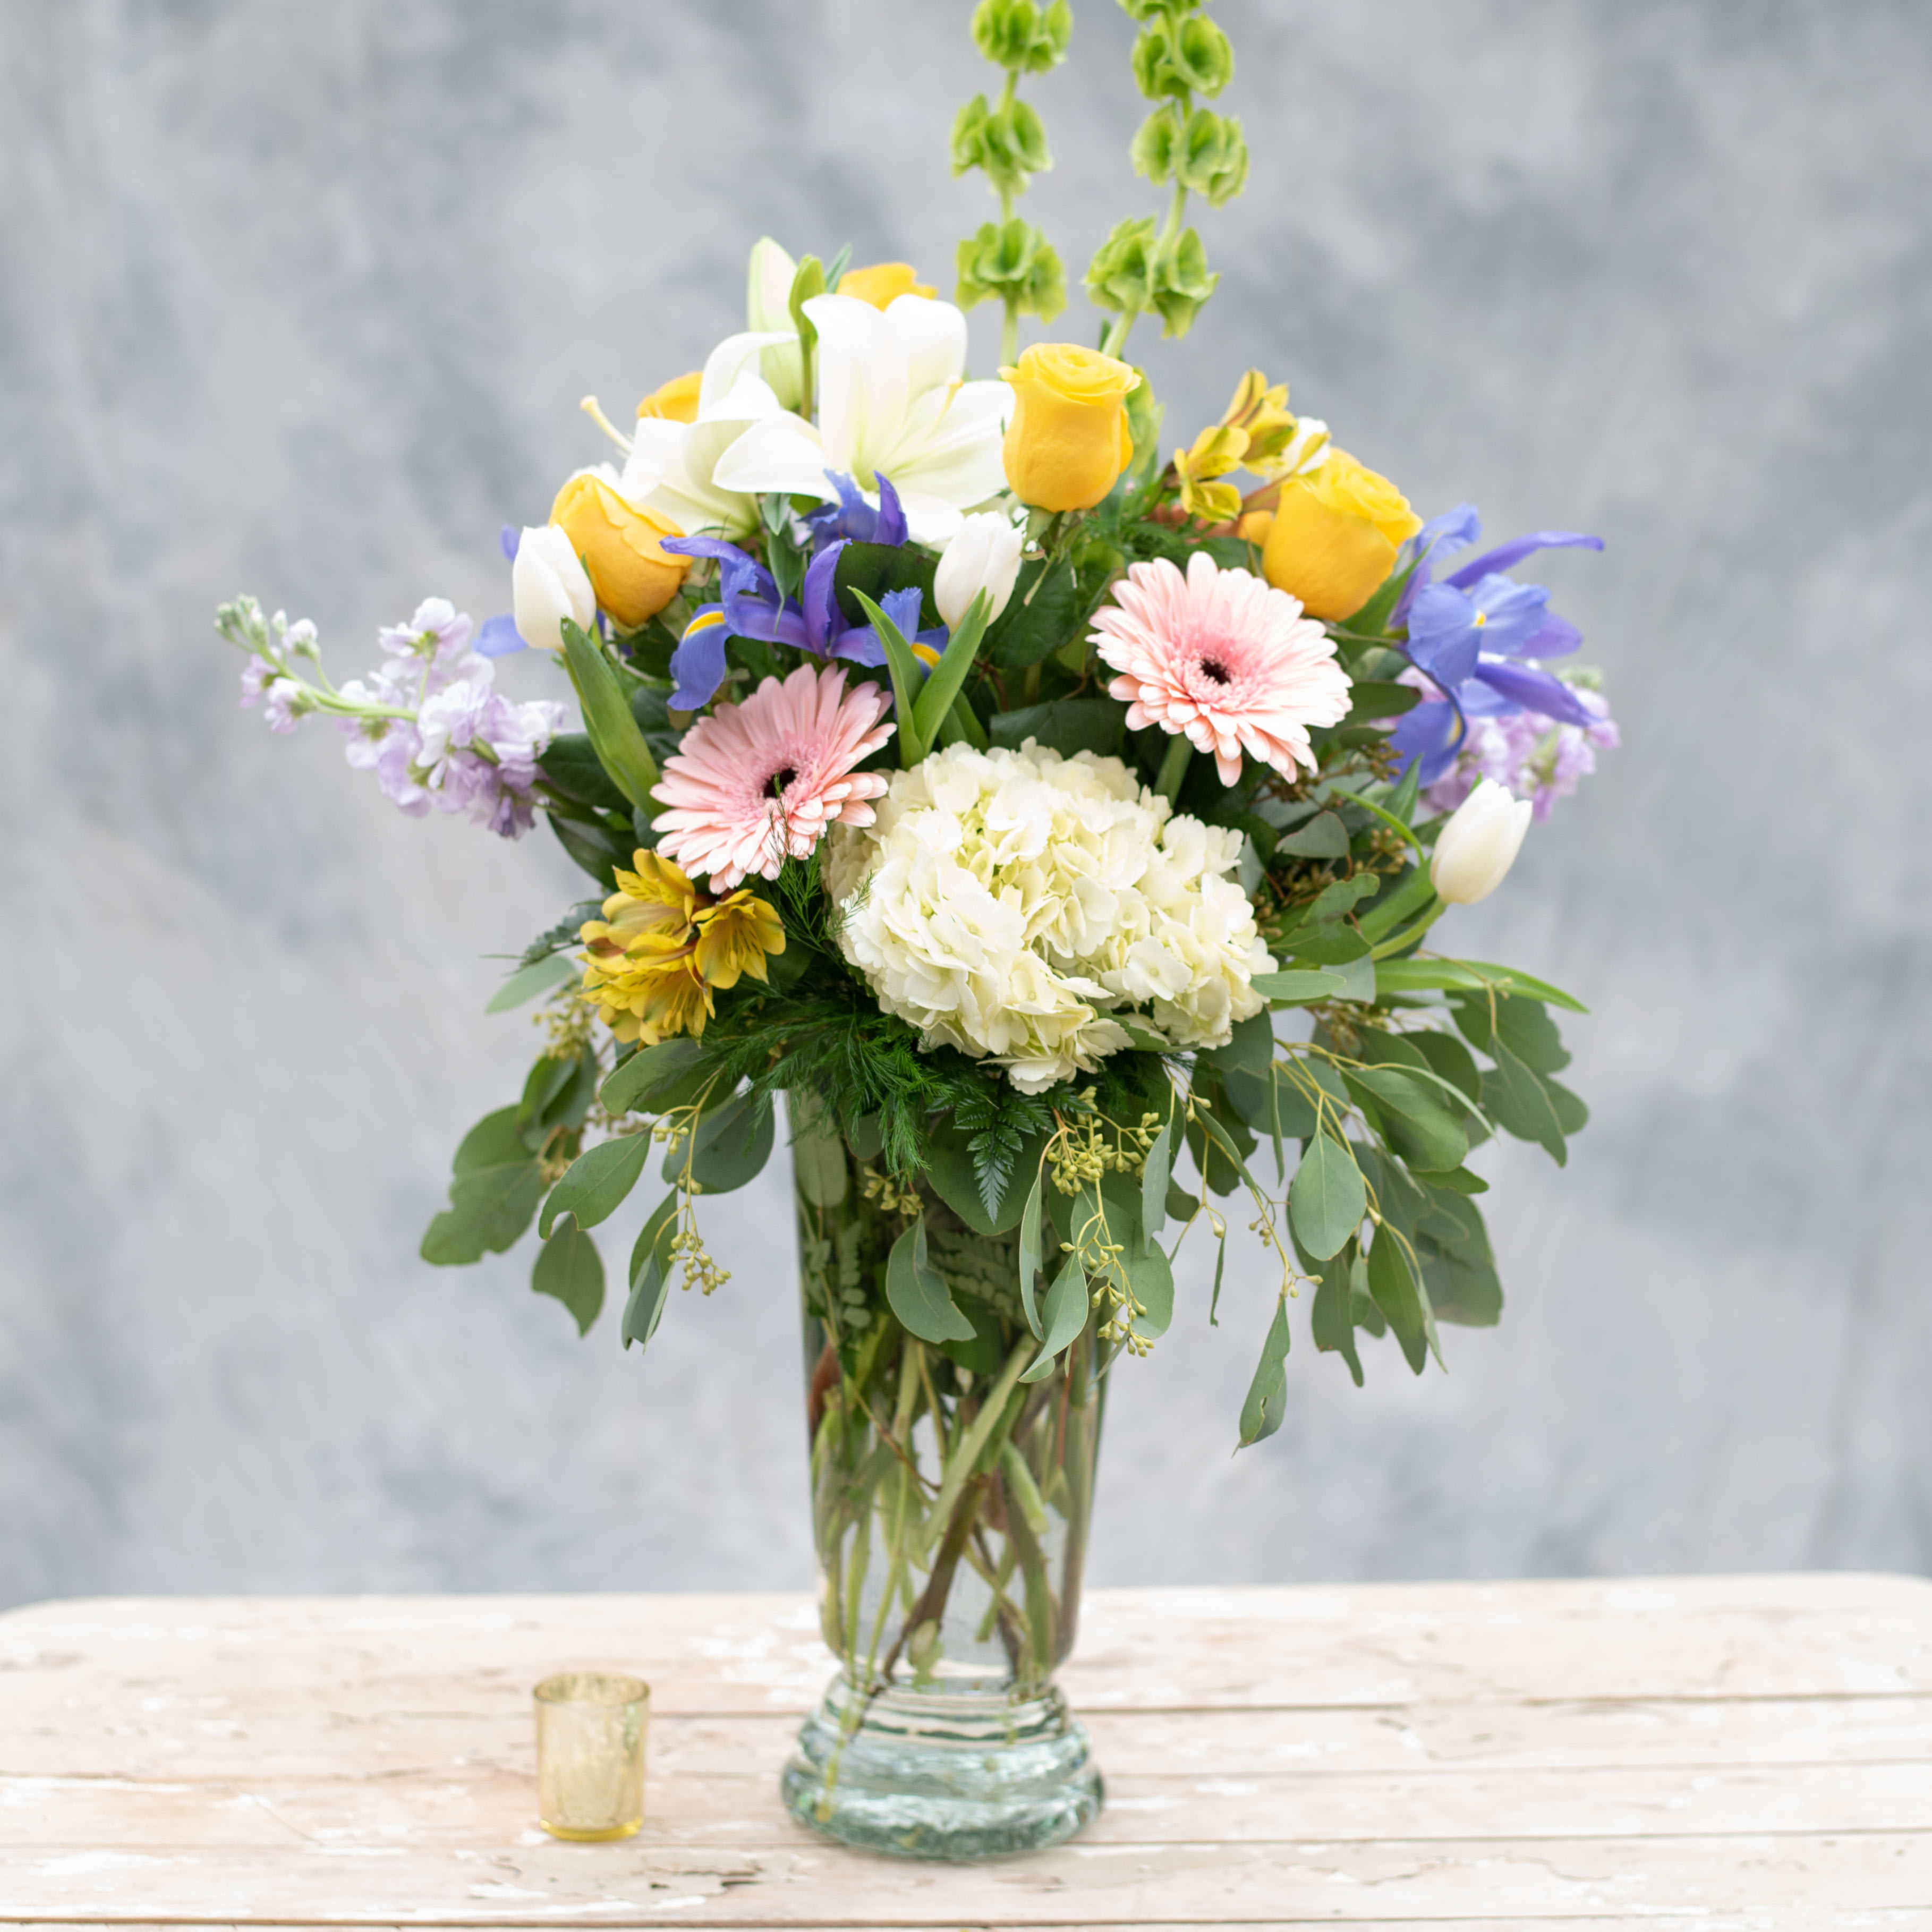 Garden Jewels - Make a statement by sending this elegant and soft arrangement, filled with &quot;Jewels&quot; from the best gardens, including, hydrangea, gerbera daisies, yellow and white roses, iris, bells of Ireland and so much more!